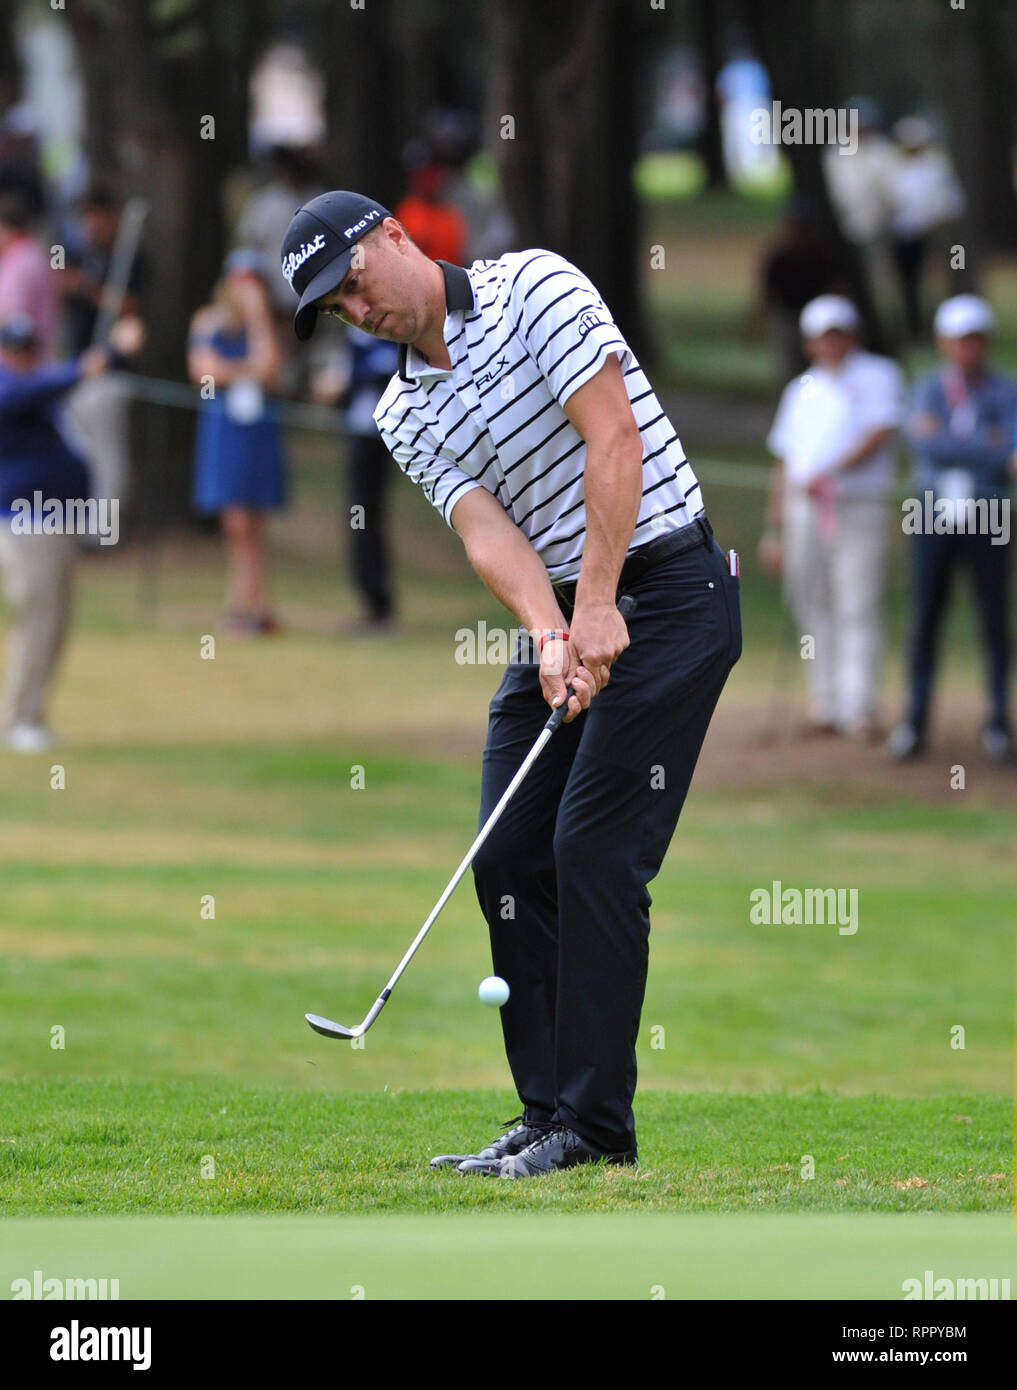 Mexico City, Mexico. 22nd Feb, 2019. Bryson DeChambeau of the United States  competes during the World Golf Championships-Mexico Championship 2019, held  at the Chapultepec Golf Club, in Mexico City, capital of Mexico,